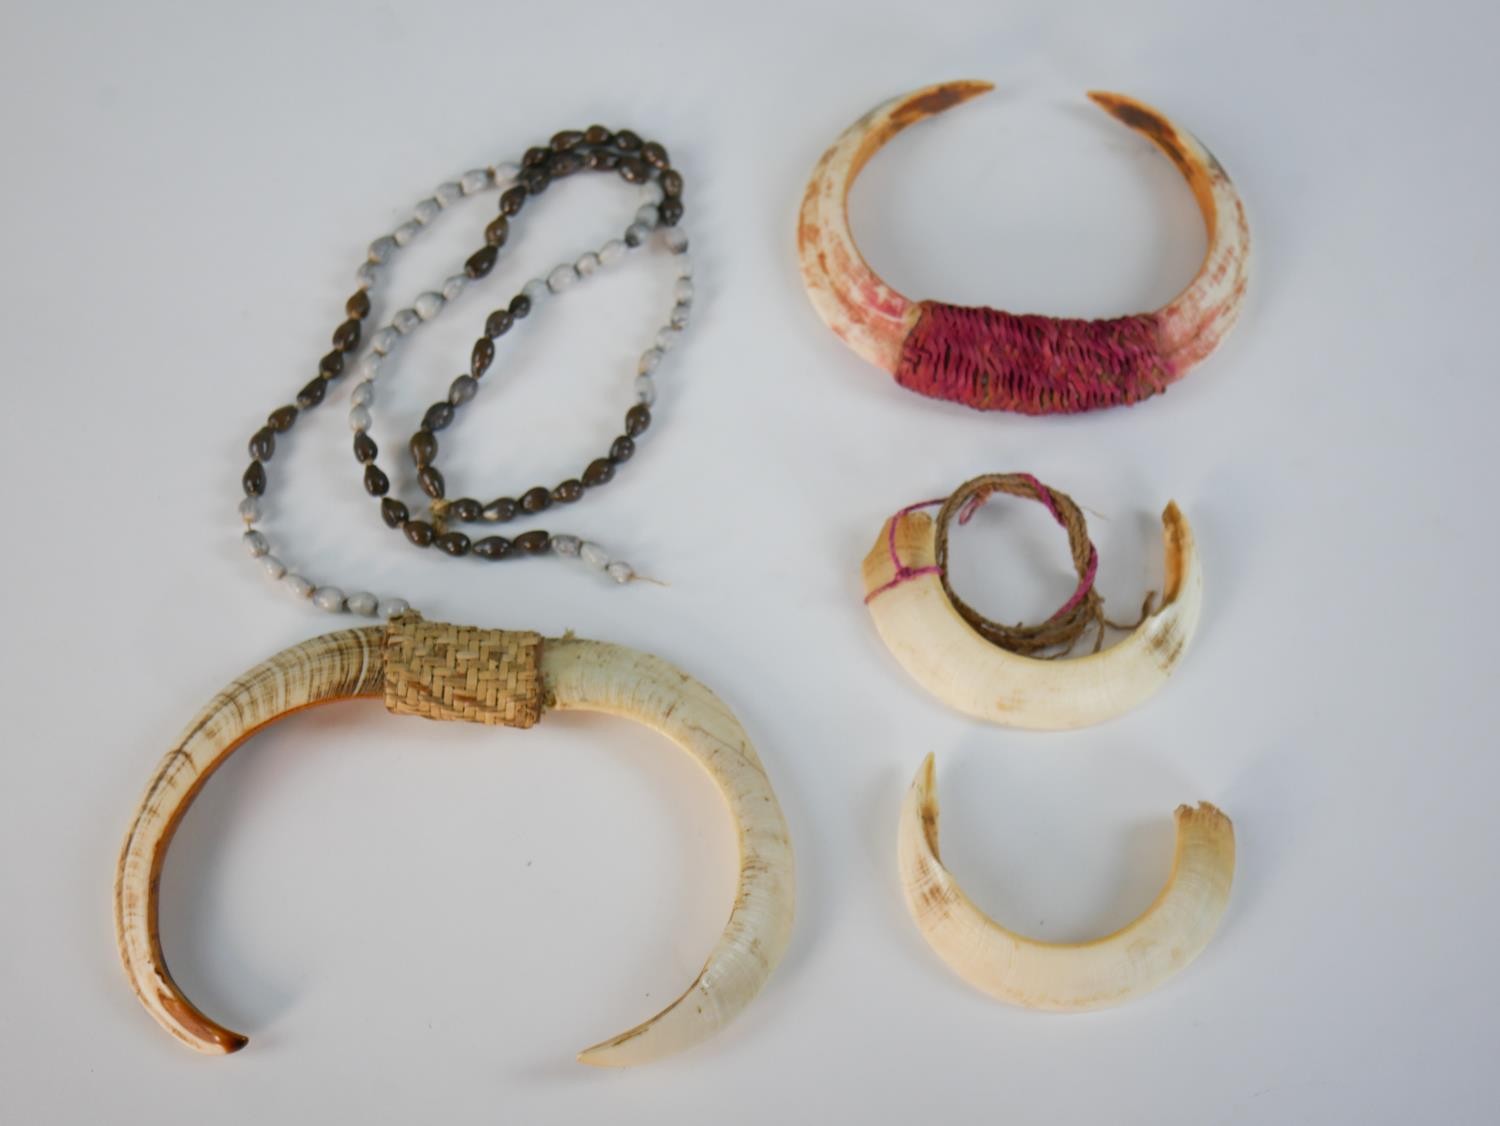 A collection of 20th century Papua New Guinea animal tusk necklaces and amulets, some bound with